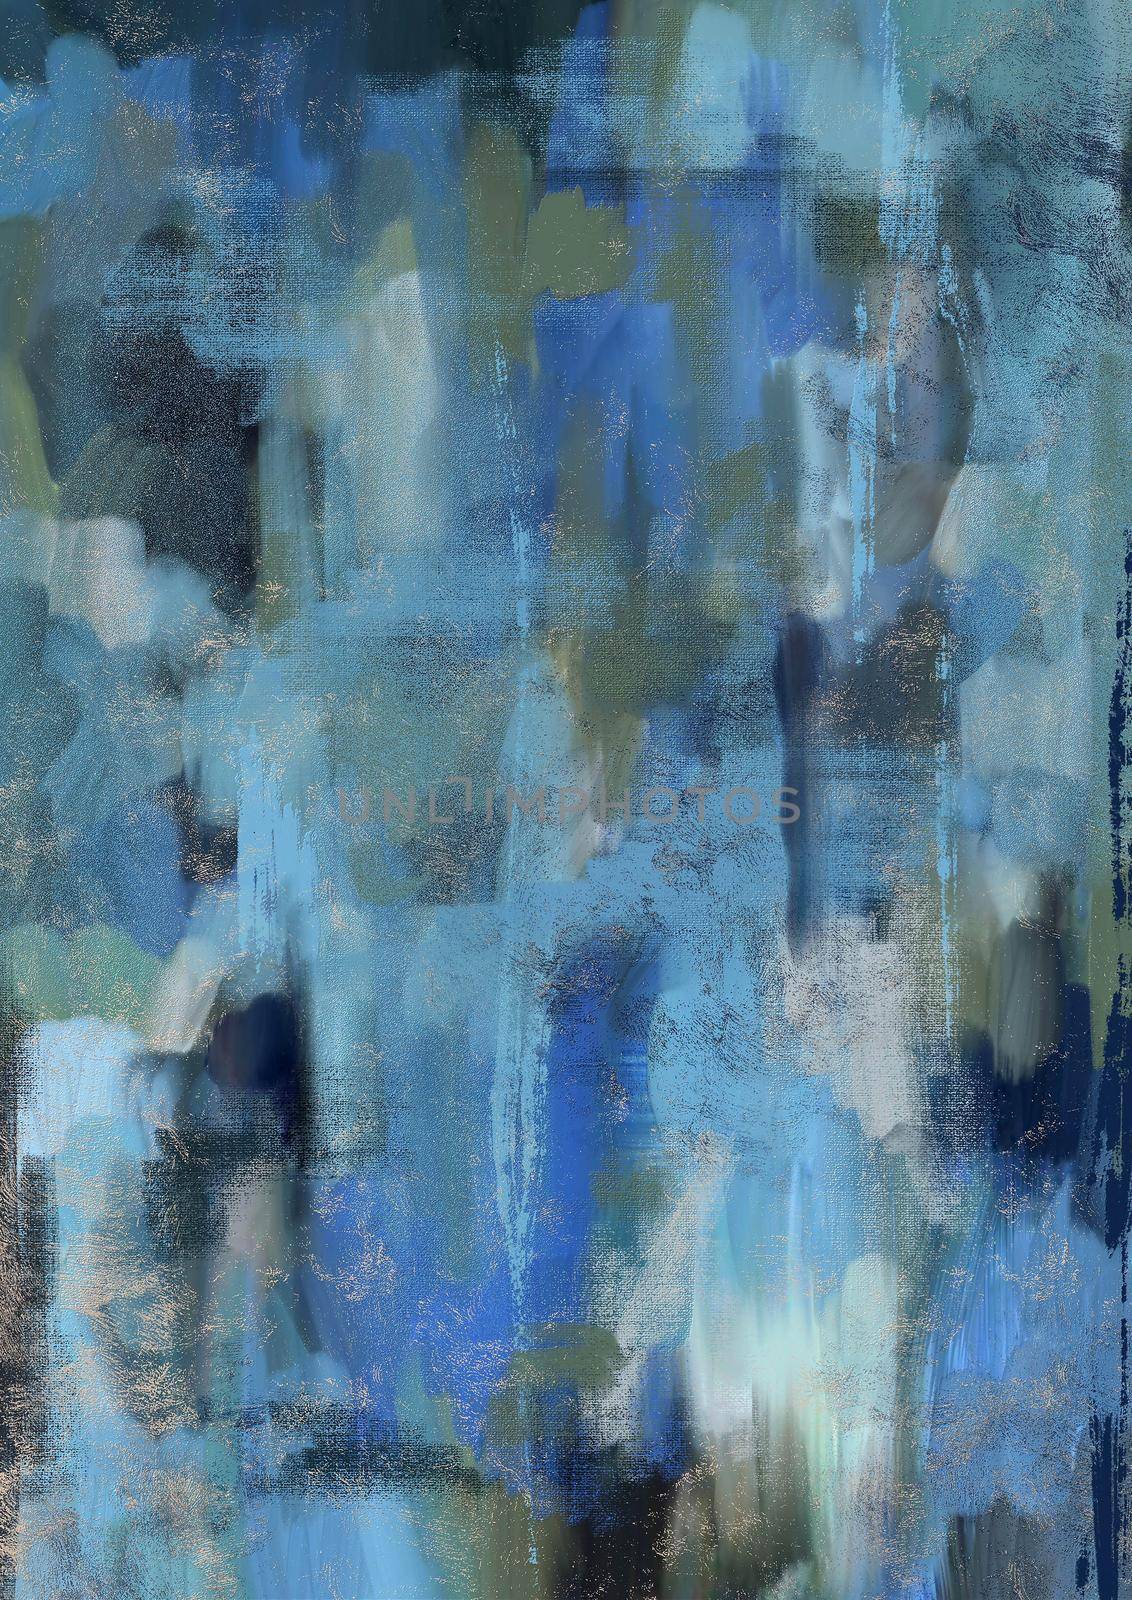 Art, oil painting, modern abstraction in a minimalist style. Brush strokes of blue and gray color. A picture for the design of a stylish and fashionable interior.